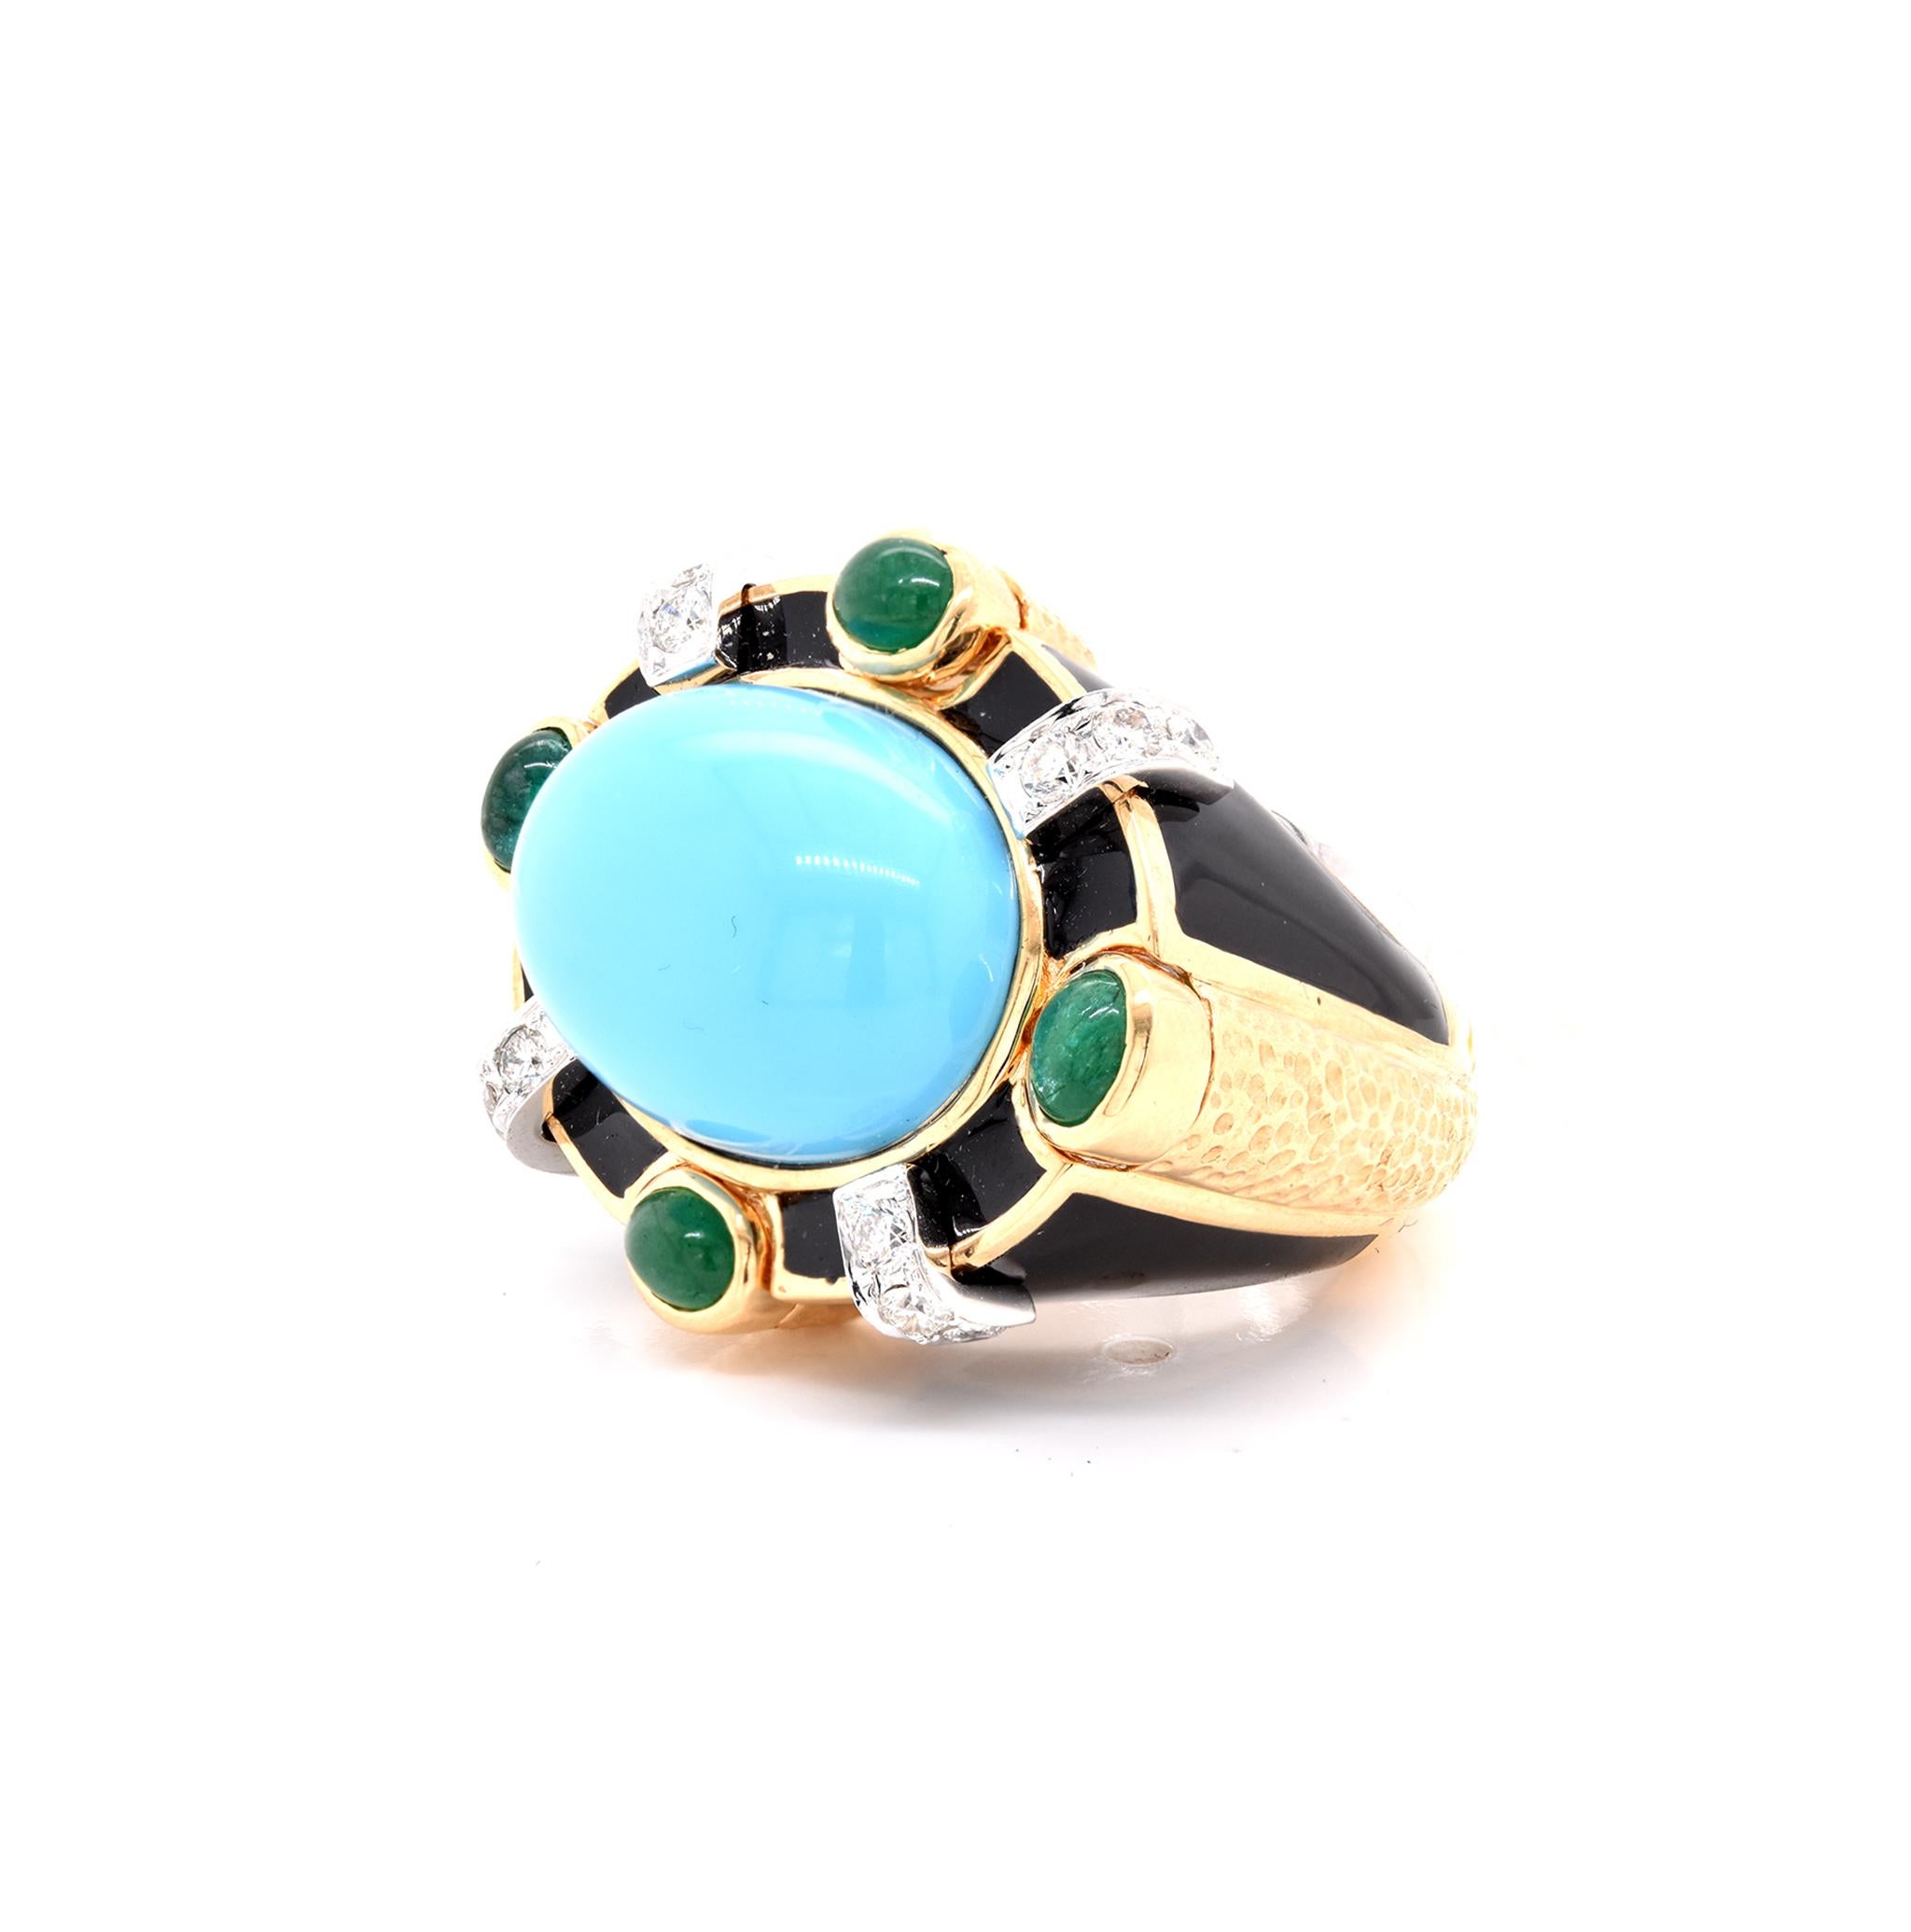 Designer: custom
Material: 18K yellow gold
Diamonds: 12 round cut = .62cttw
Color: G
Clarity: VS
Emerald: 4 cabochon cut = 1.39cttw
Ring Size: 7 (please allow up to 2 additional business days for sizing requests)
Dimensions: ring top measures